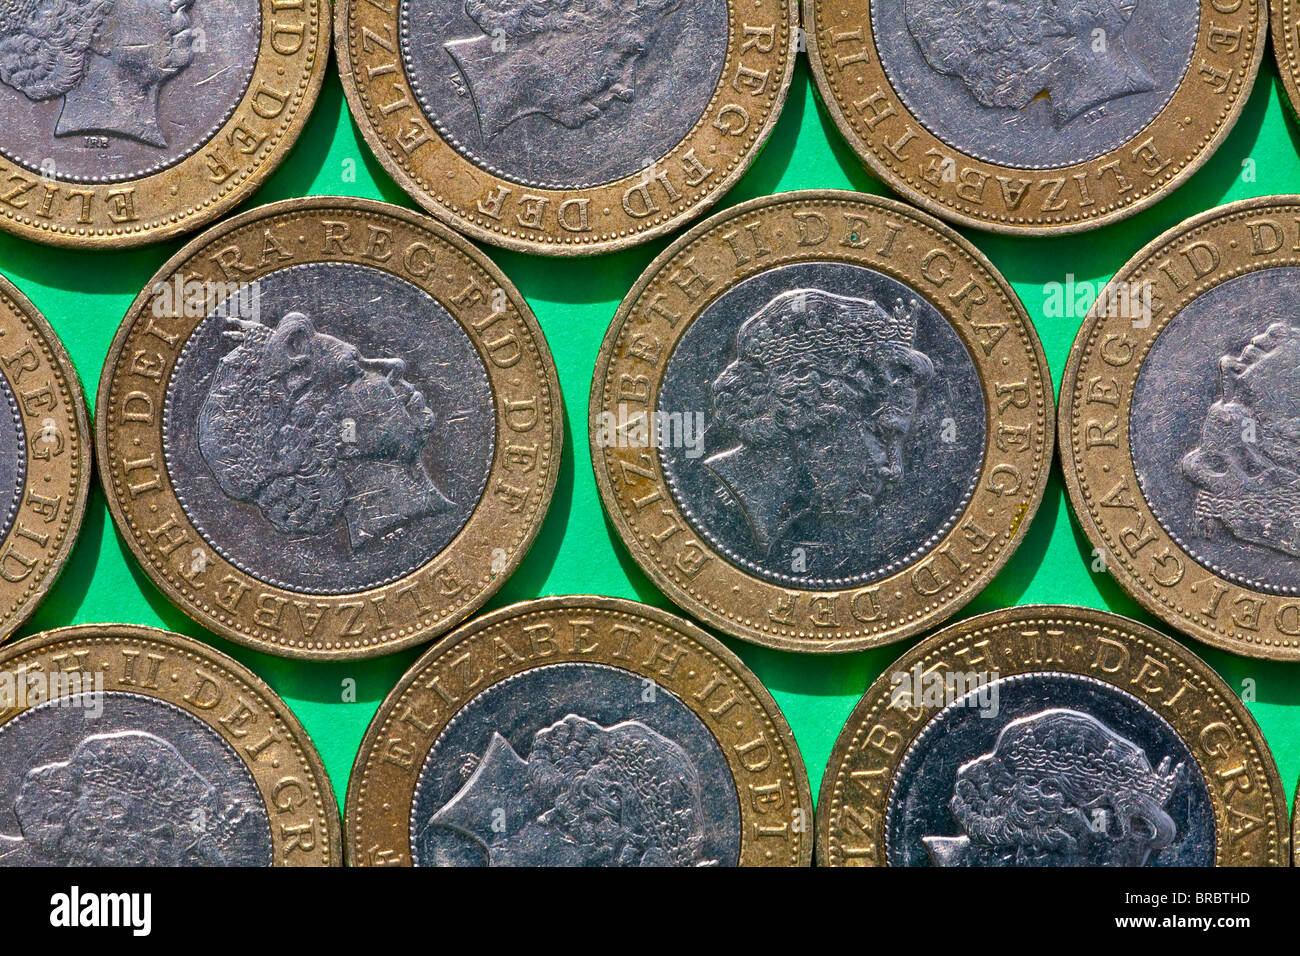 Two pound coins shown from above Stock Photo